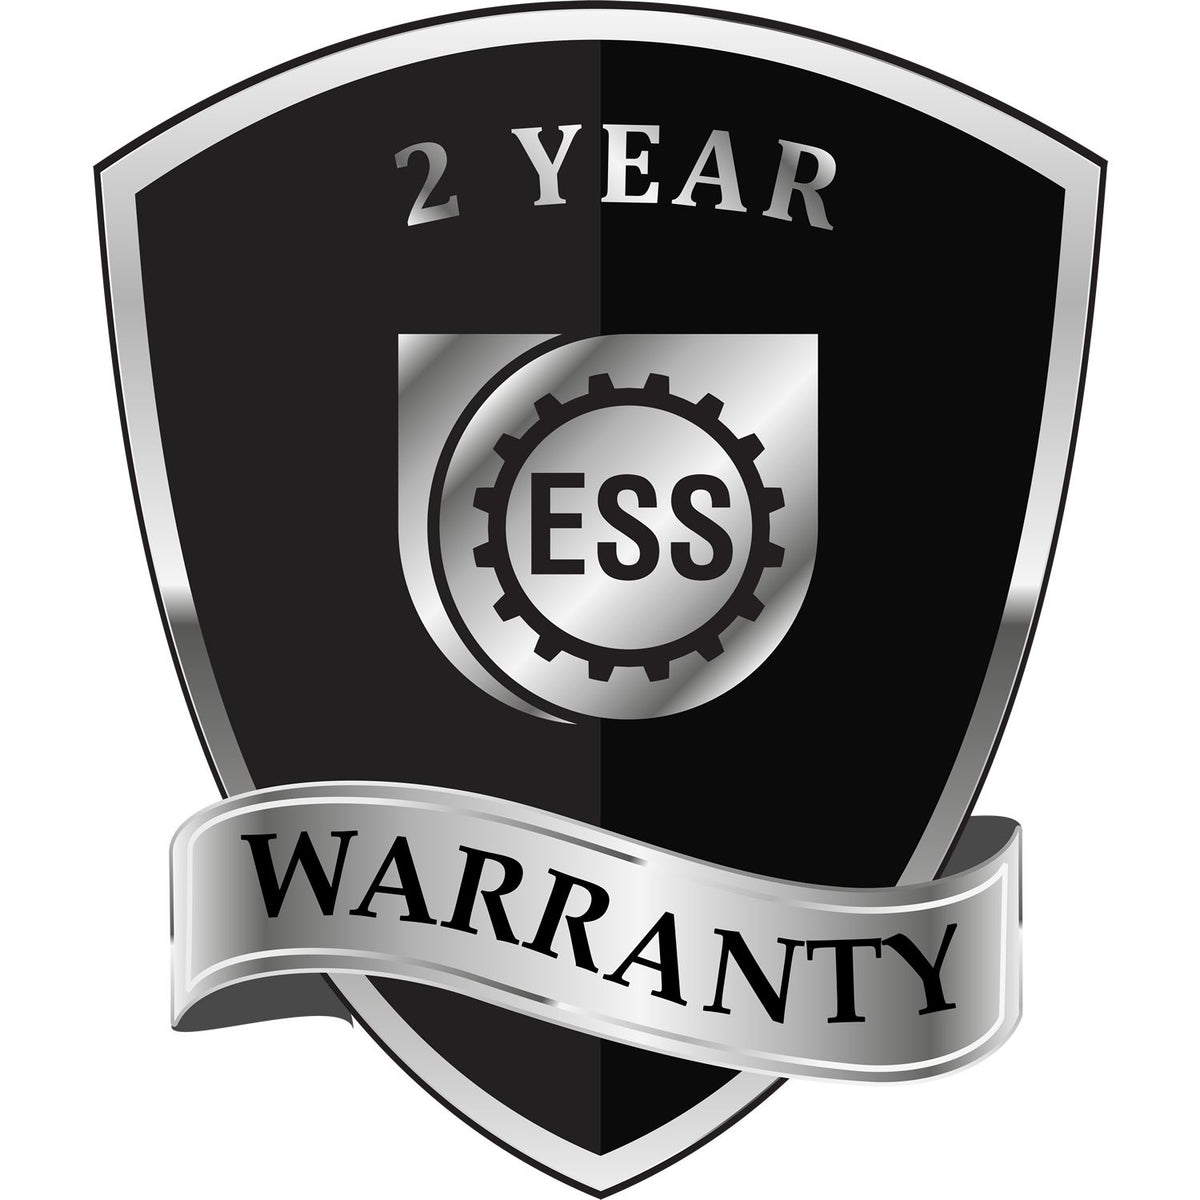 A badge or emblem showing a warranty icon for the Iowa Desk Architect Embossing Seal